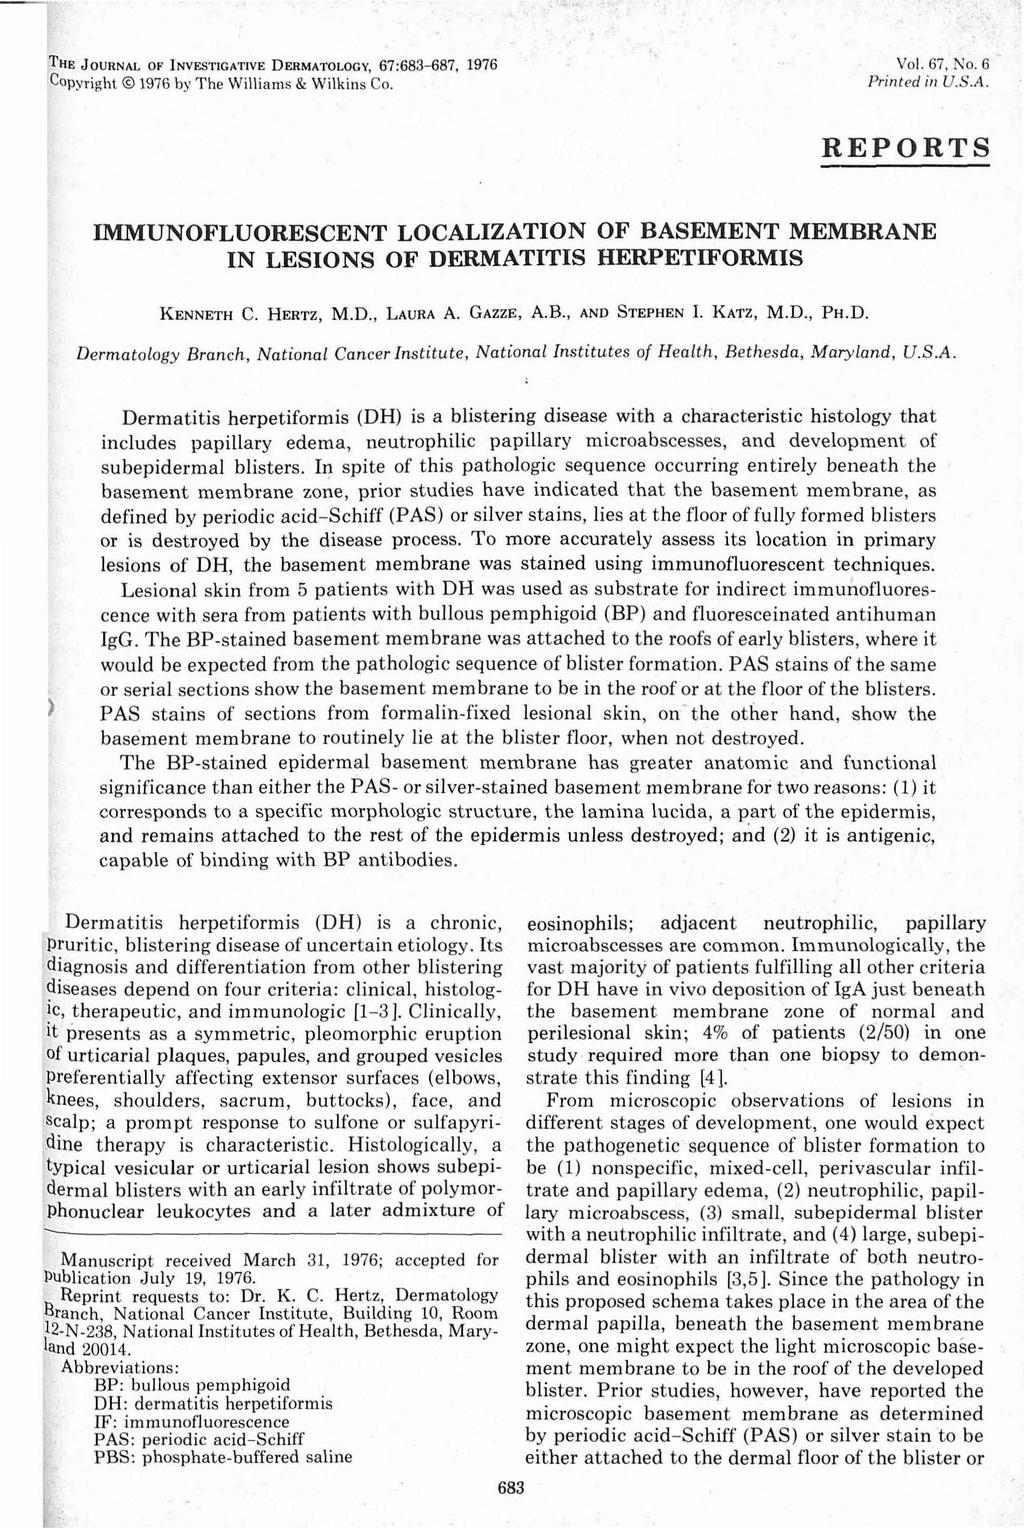 THE JOURNAL OF INVESTIGATIVE DERMATOLOGY, 67:683-687, 1976 Copyri ght 1976 by The Williams & Wilkins Co. Vol. 67, No. 6 Printed ill U.S.A. REPORTS IMMUNOFLUORESCENT LOCALIZATION OF BASEMENT MEMBRANE IN LESIONS OF DERMATITIS HERPETIFORMIS KENNETH C.